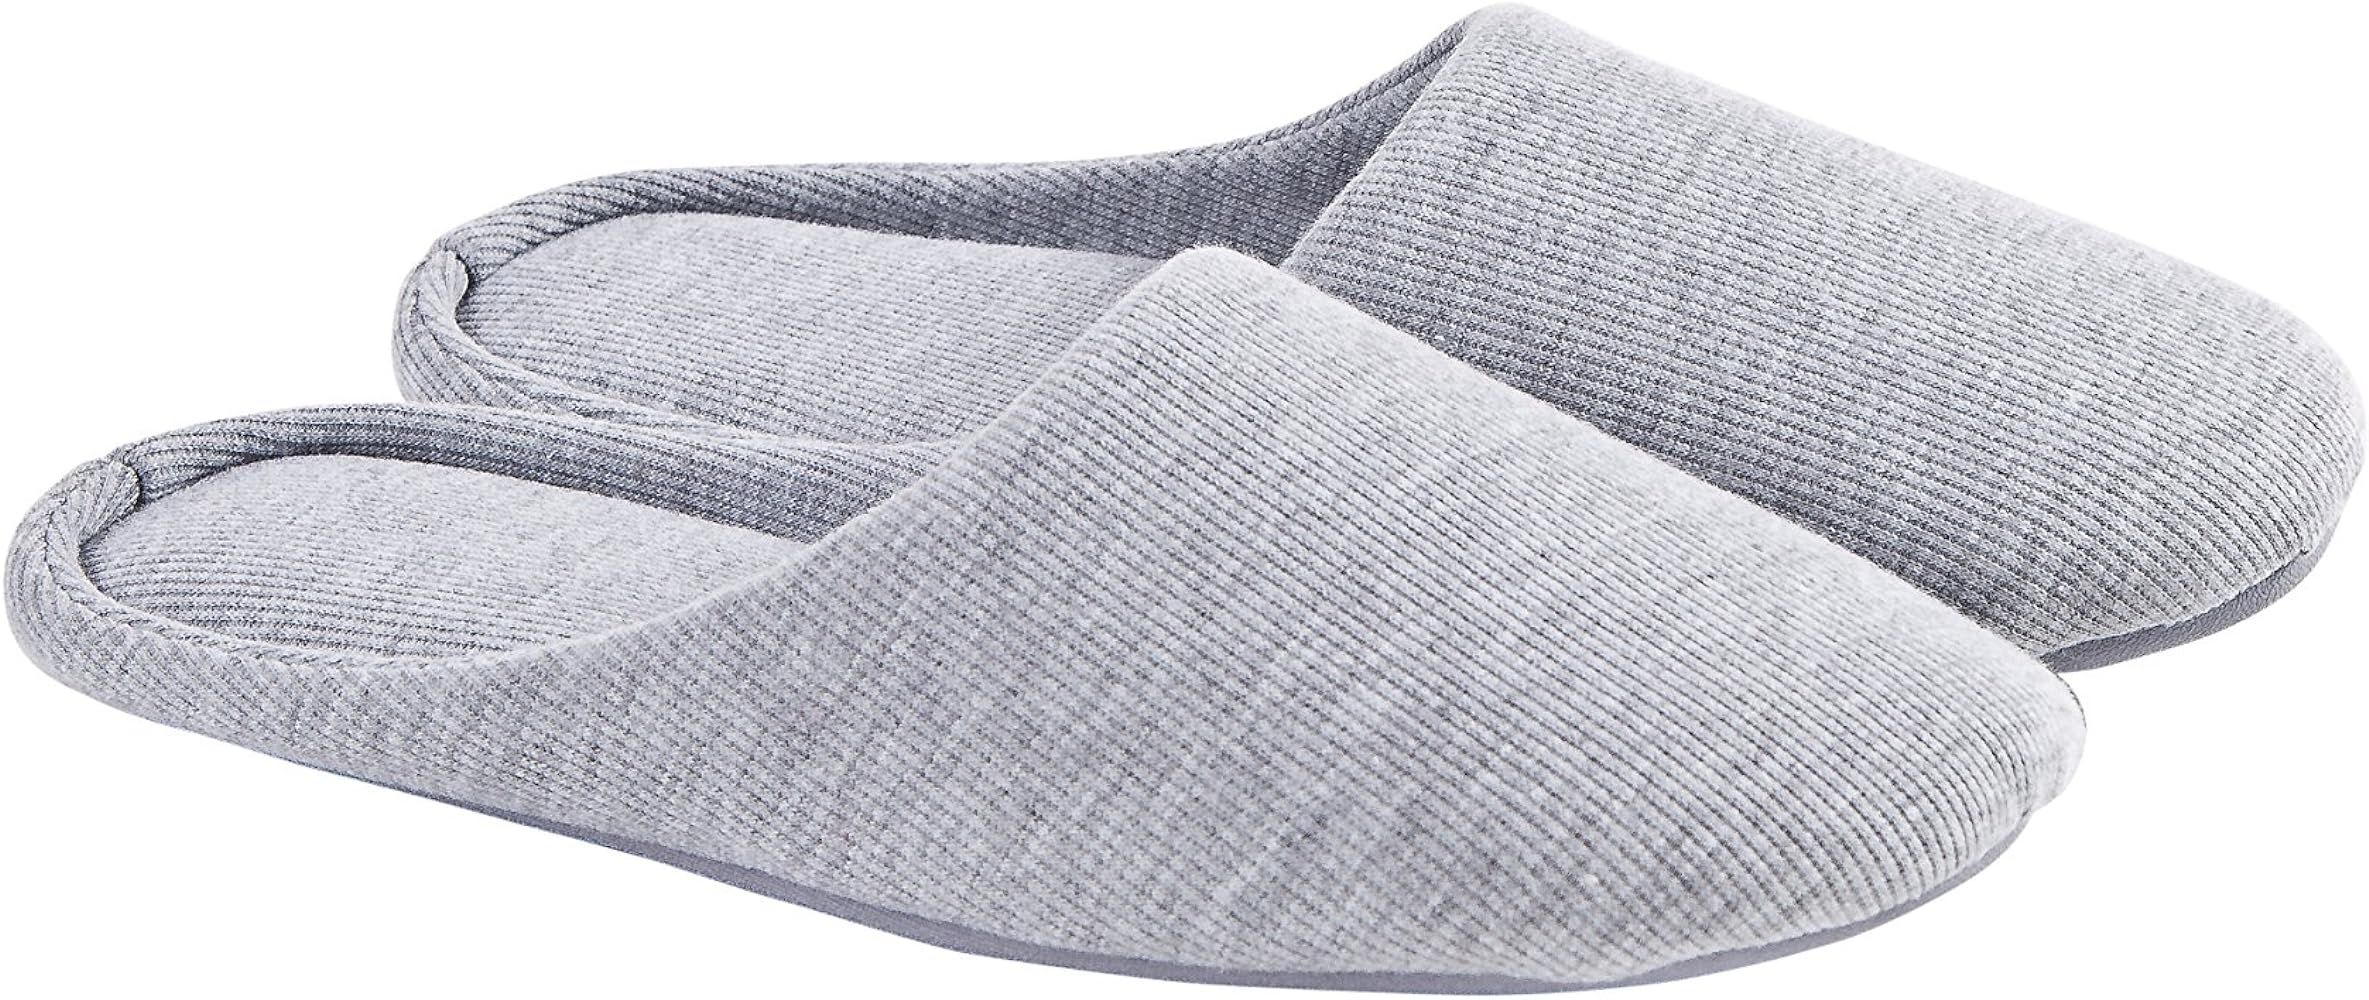 ofoot Womens Cotton Washable Summer House Slippers Indoor Slip On Bedroom Shoes with Memory Foam Clo | Amazon (US)